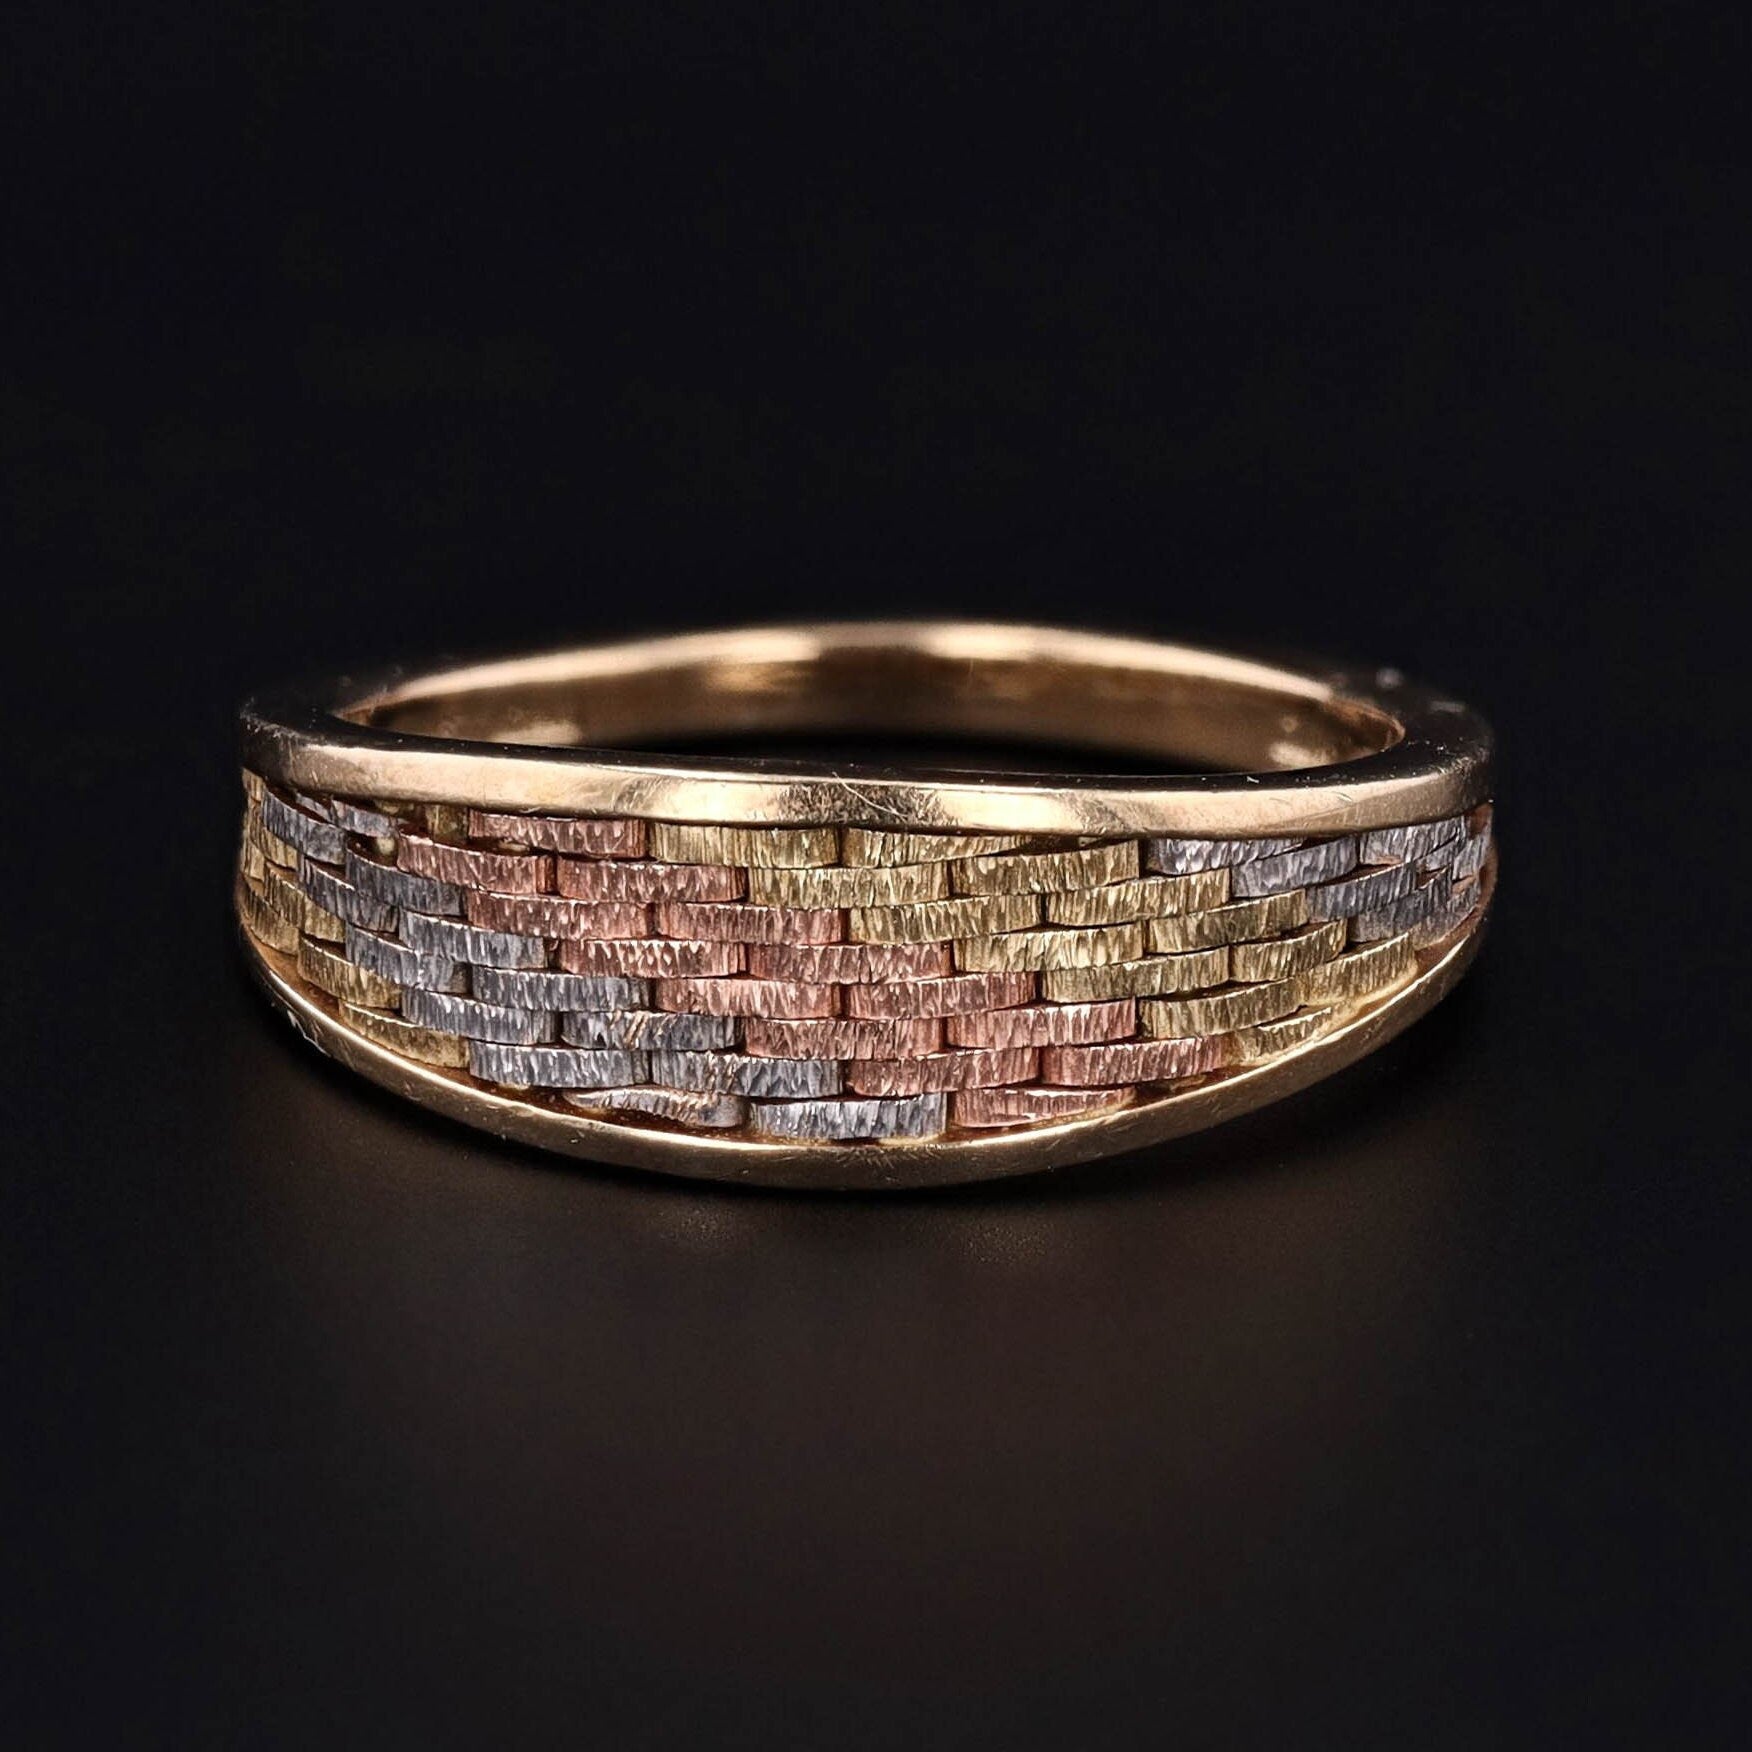 Vintage Tri Color 14k Rose White and Yellow Gold Band with Woven Design